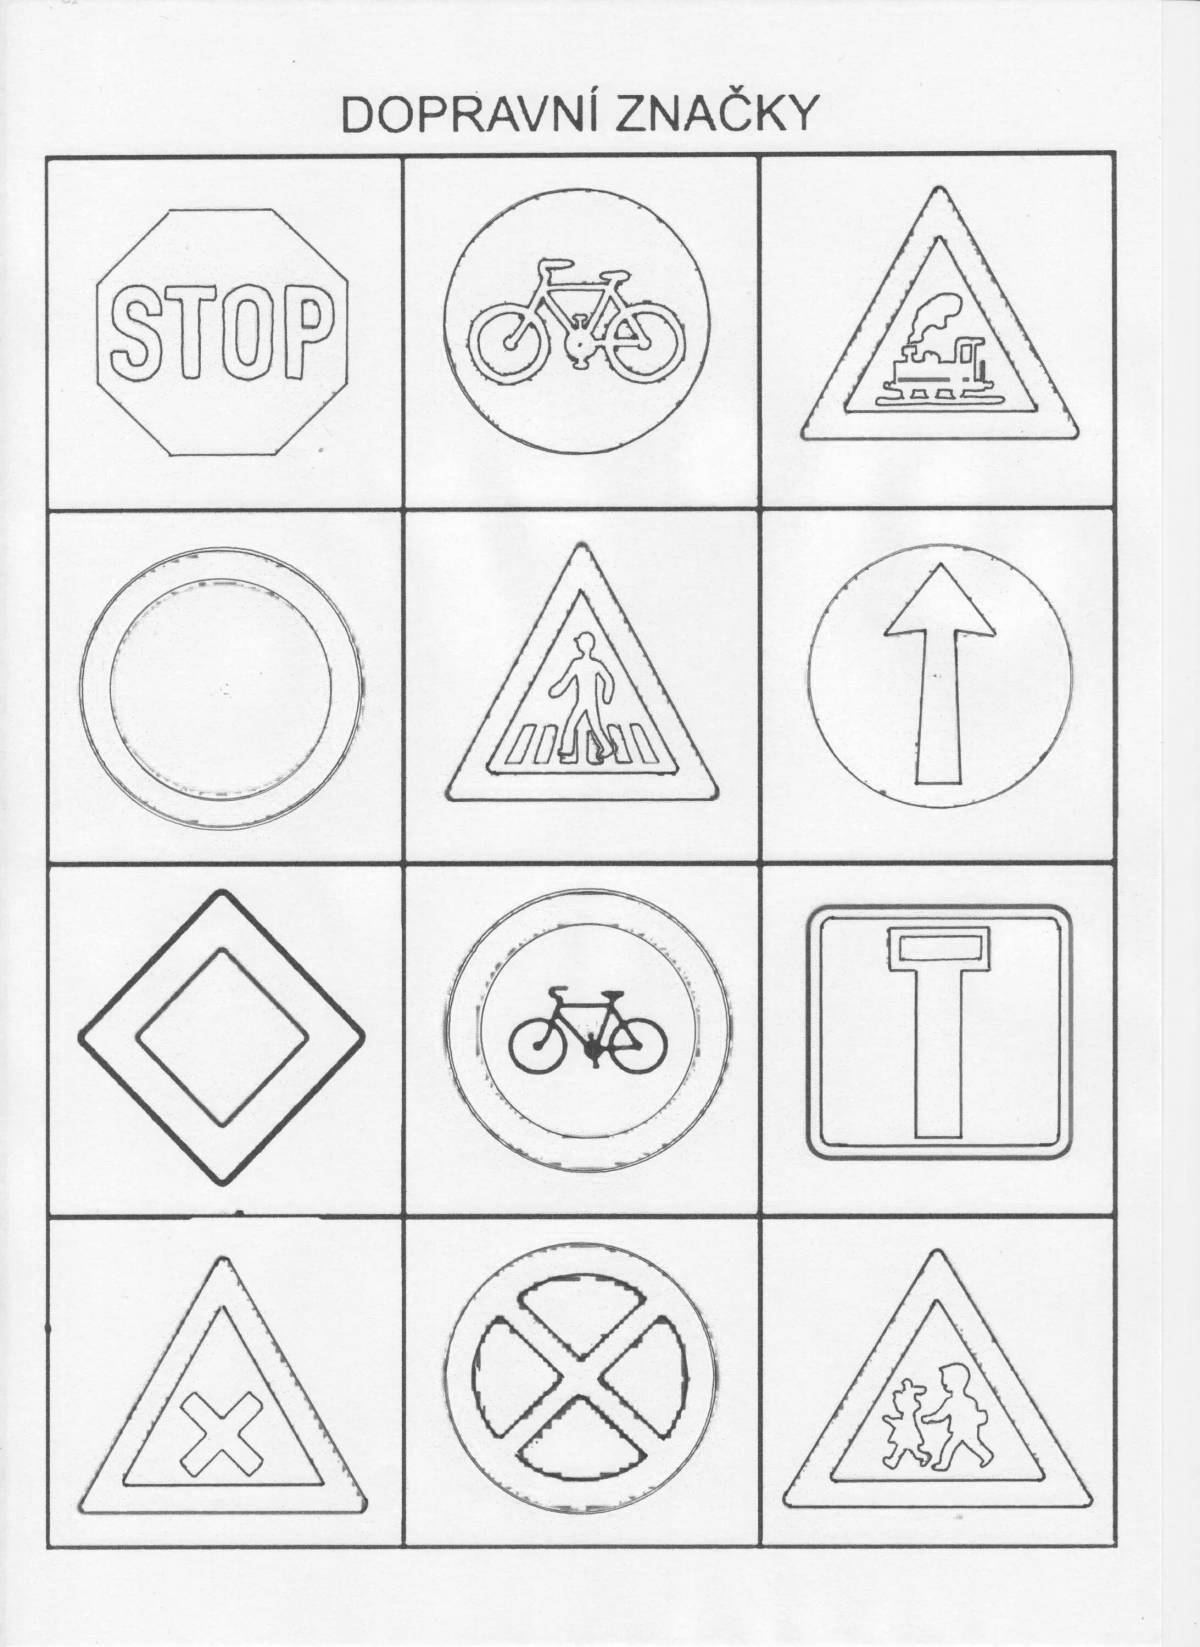 Bold coloring rules of the road road signs